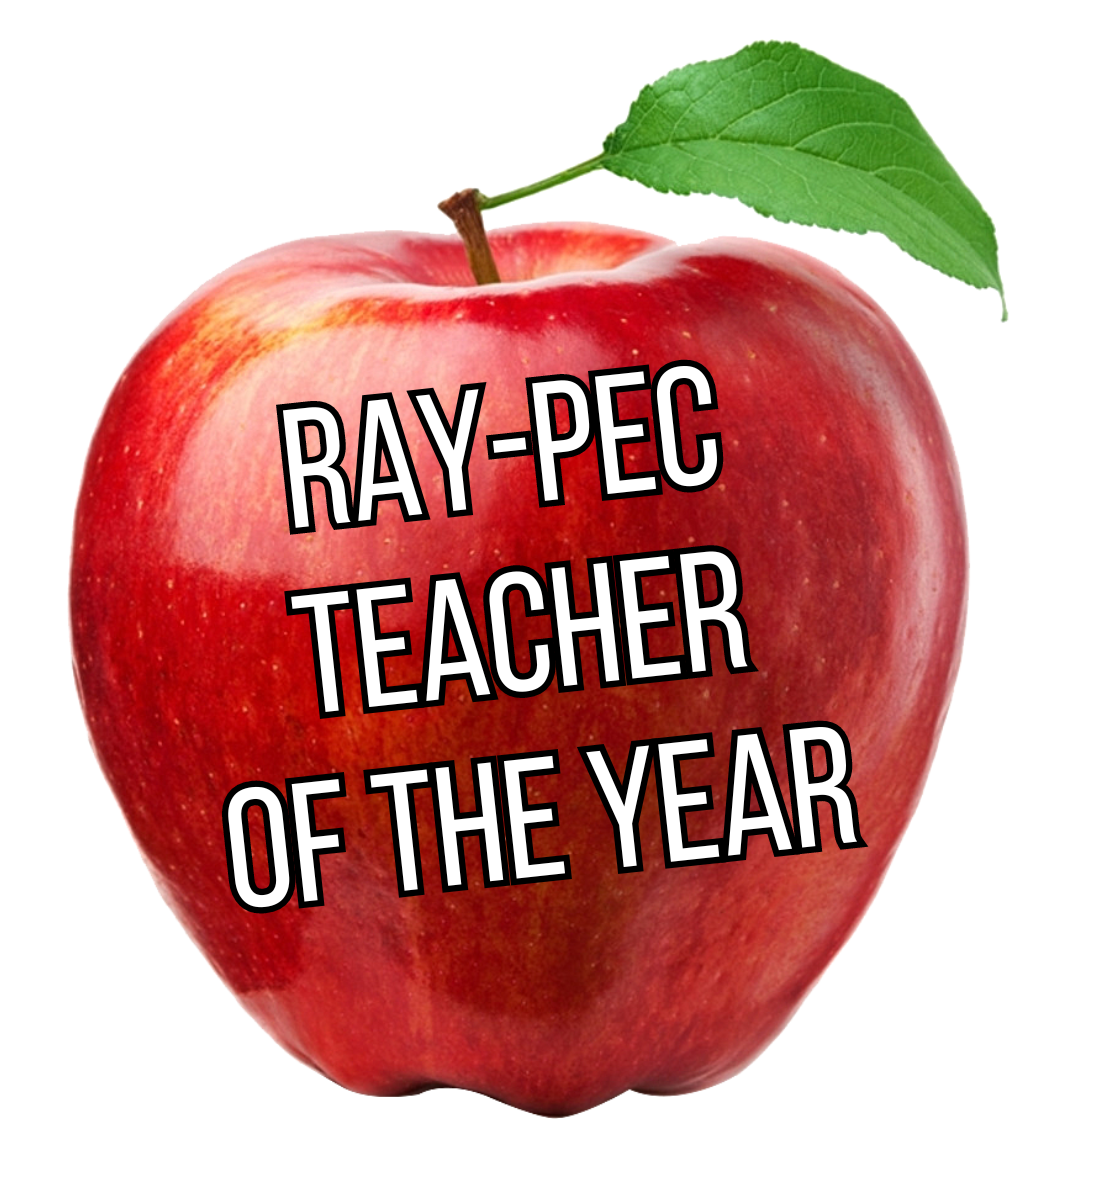 Apple with the text "Ray-Pec Teacher of the Year"